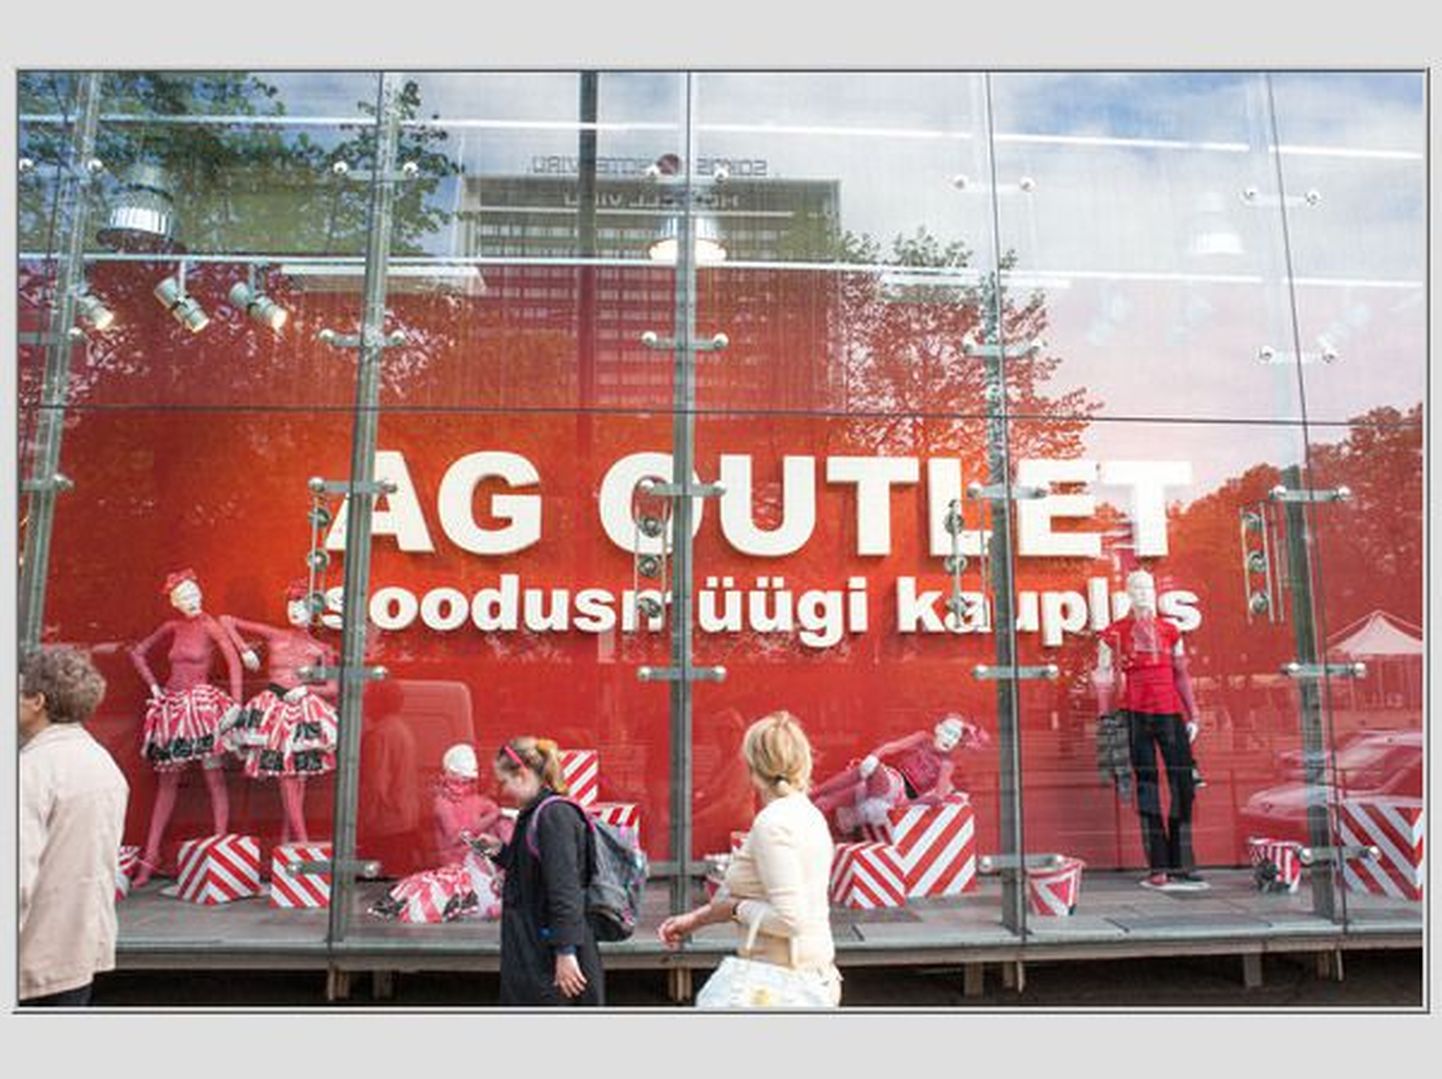 A&G outlet.